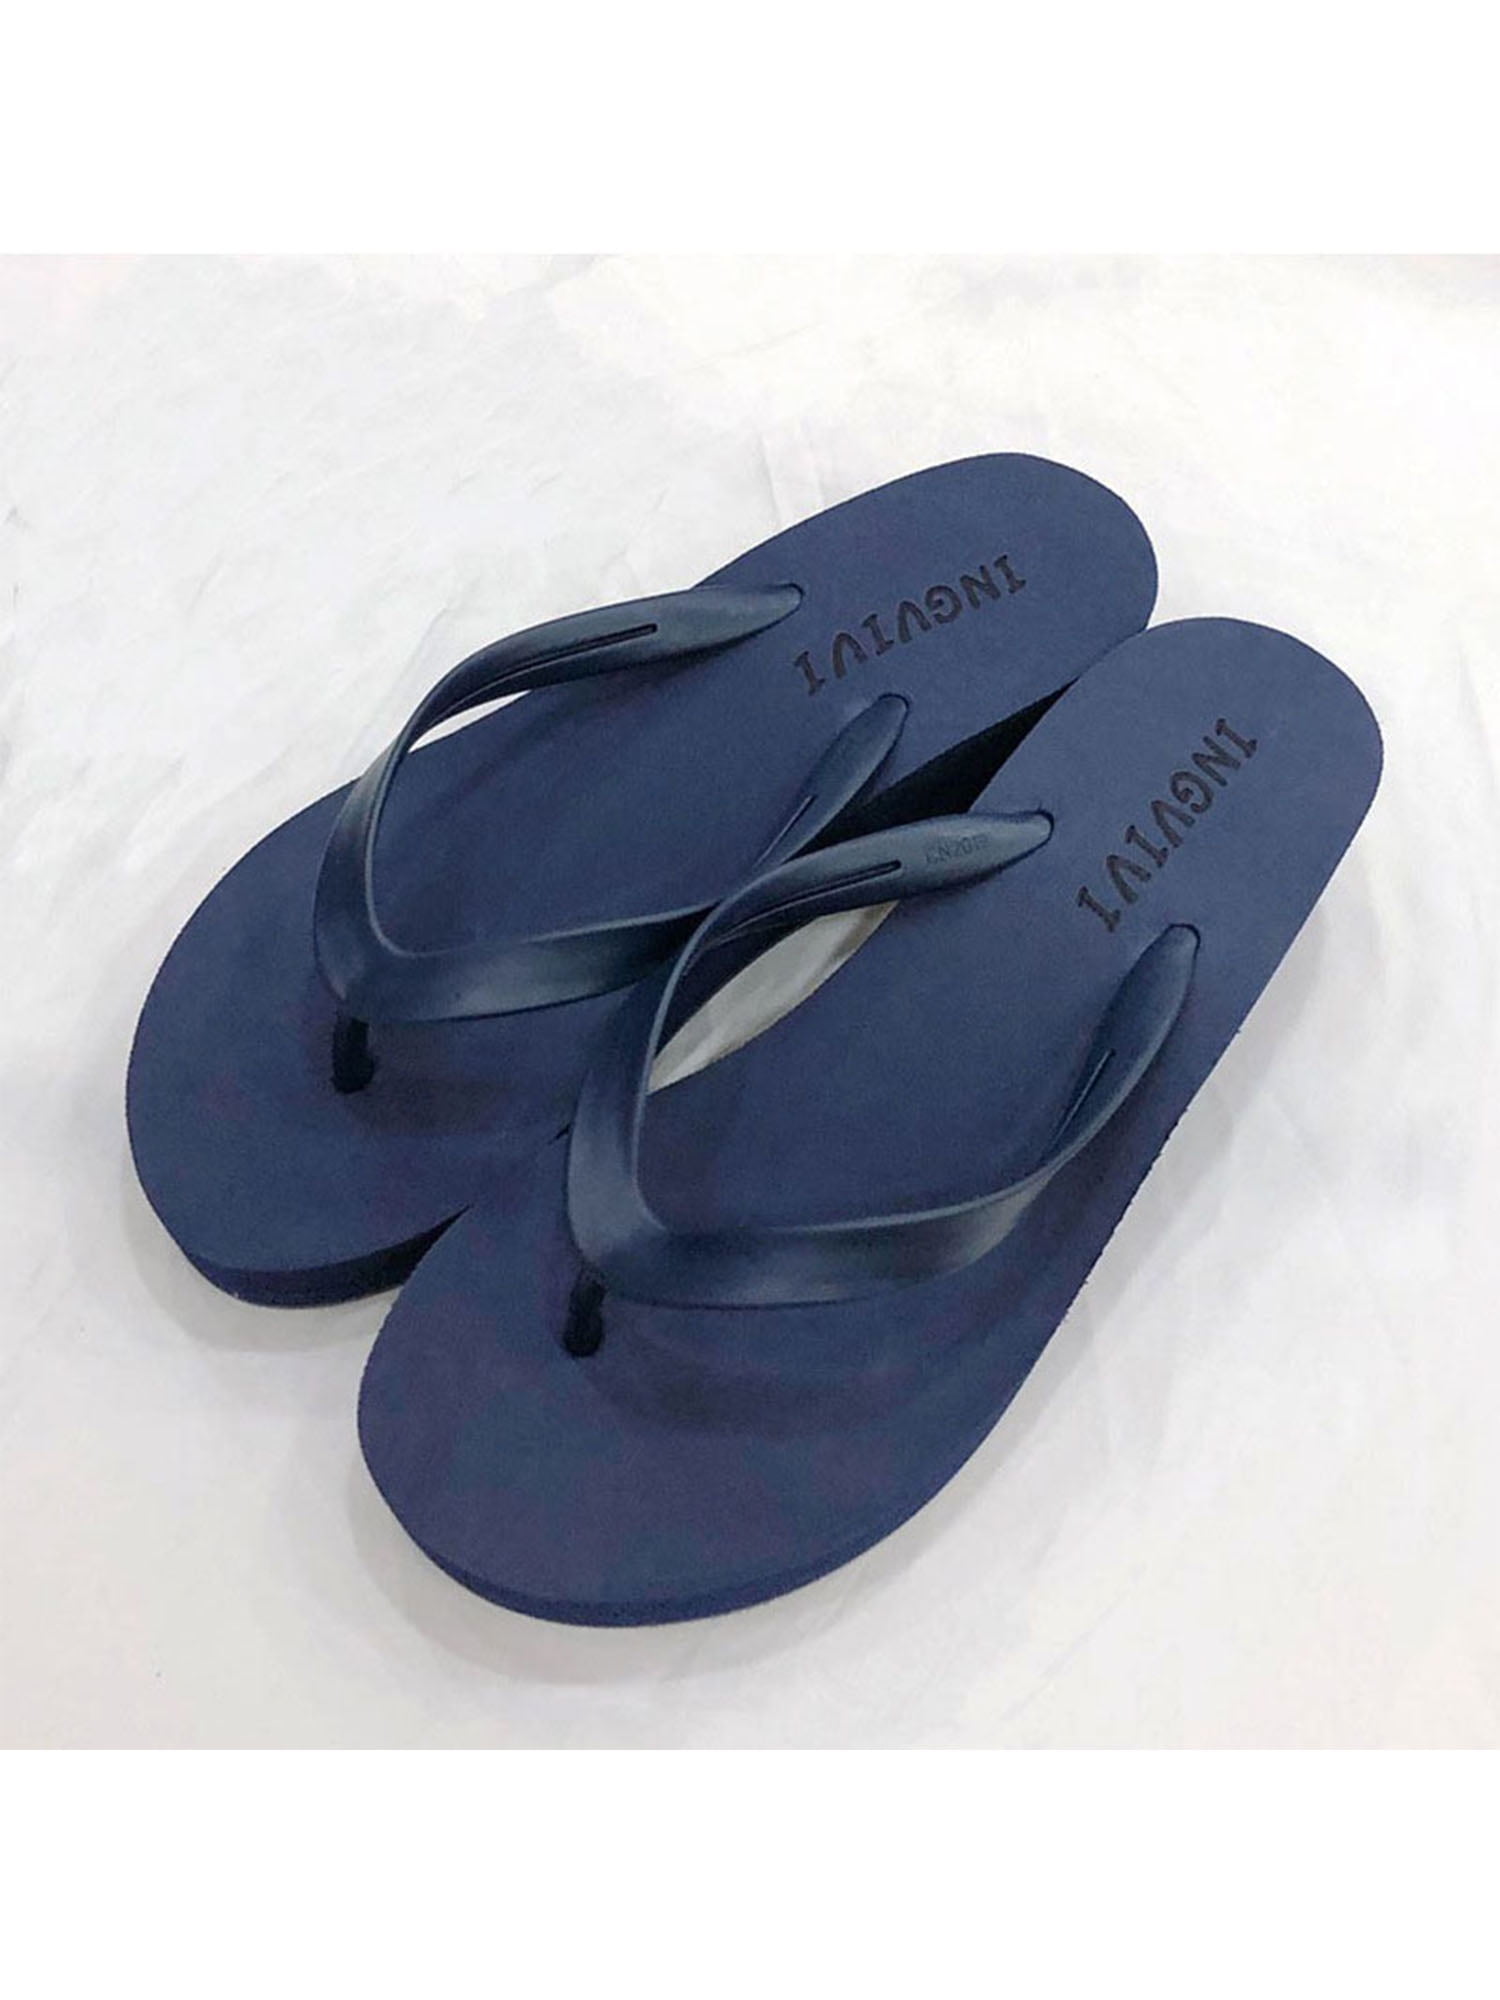 Women Sliders Woven Linen Slippers Summer Flat Sandals With Bow Floral Slip On Ladies Skidproof Casual Walking Holiday Wide Fit Beach Slides Indoor Outdoor